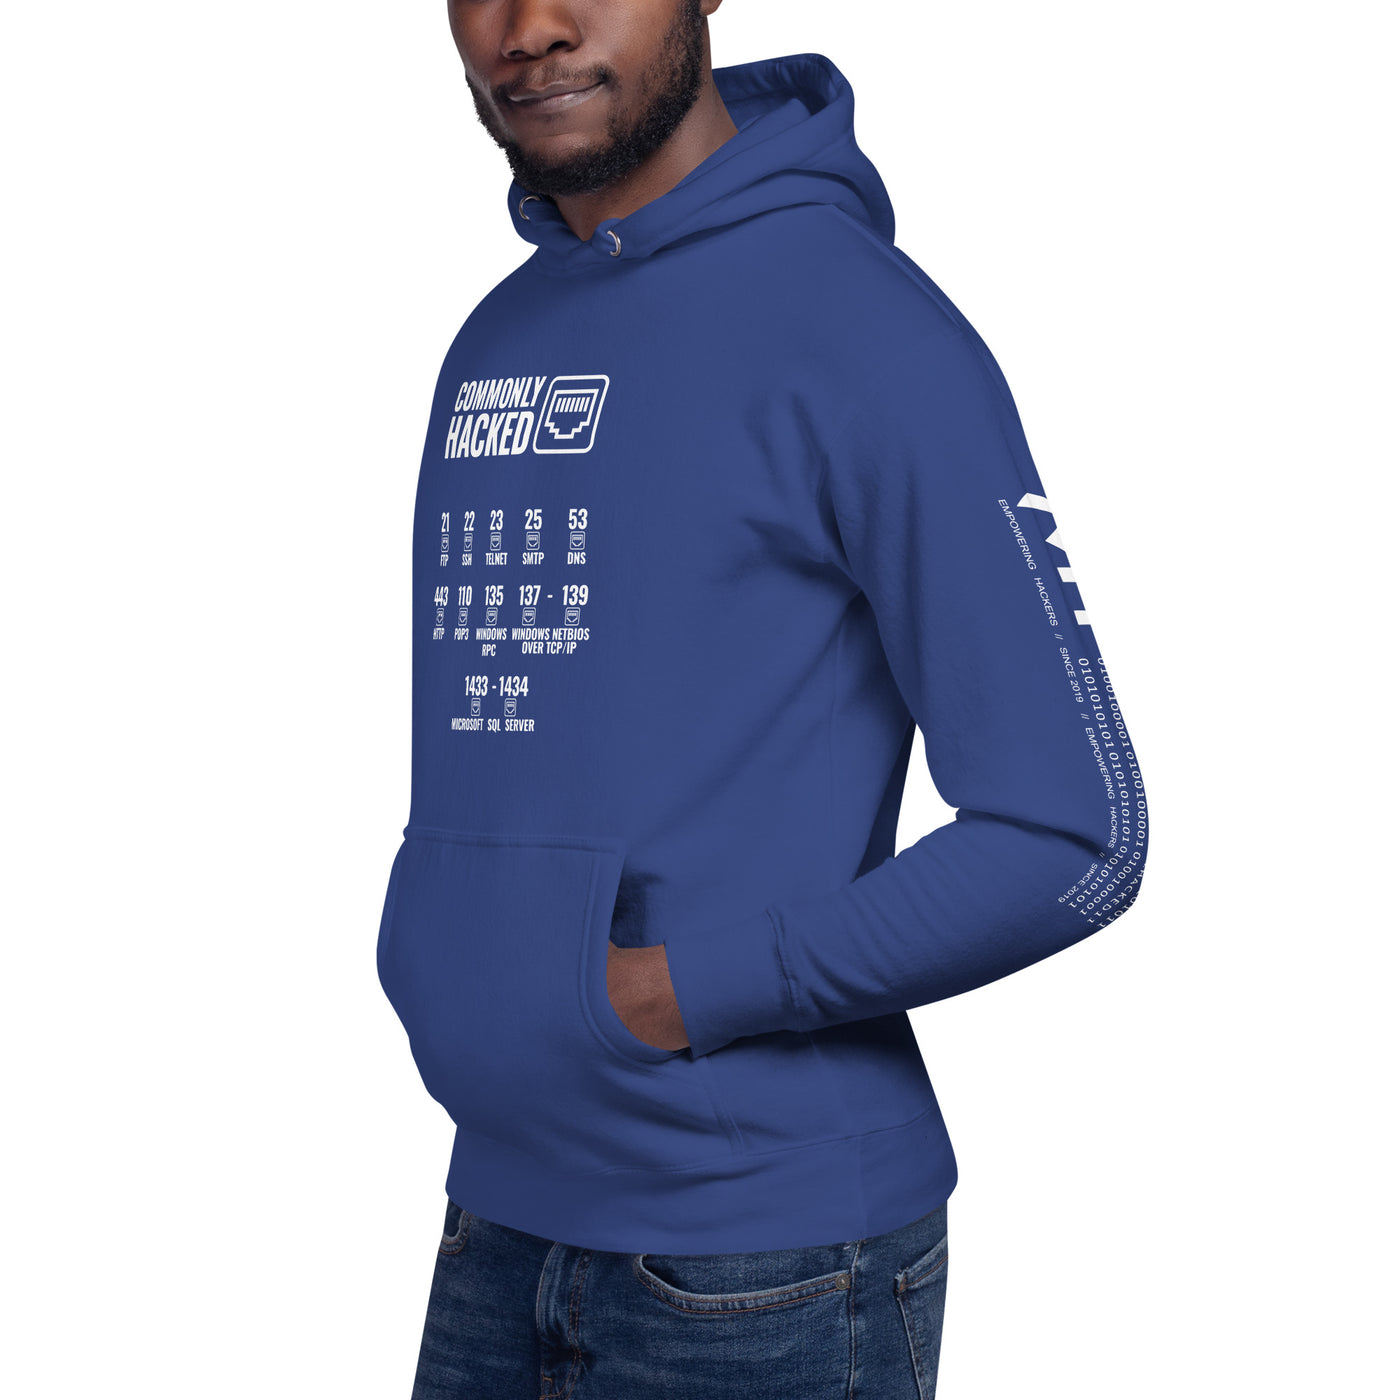 Commonly Hacked Ports - Unisex Hoodie